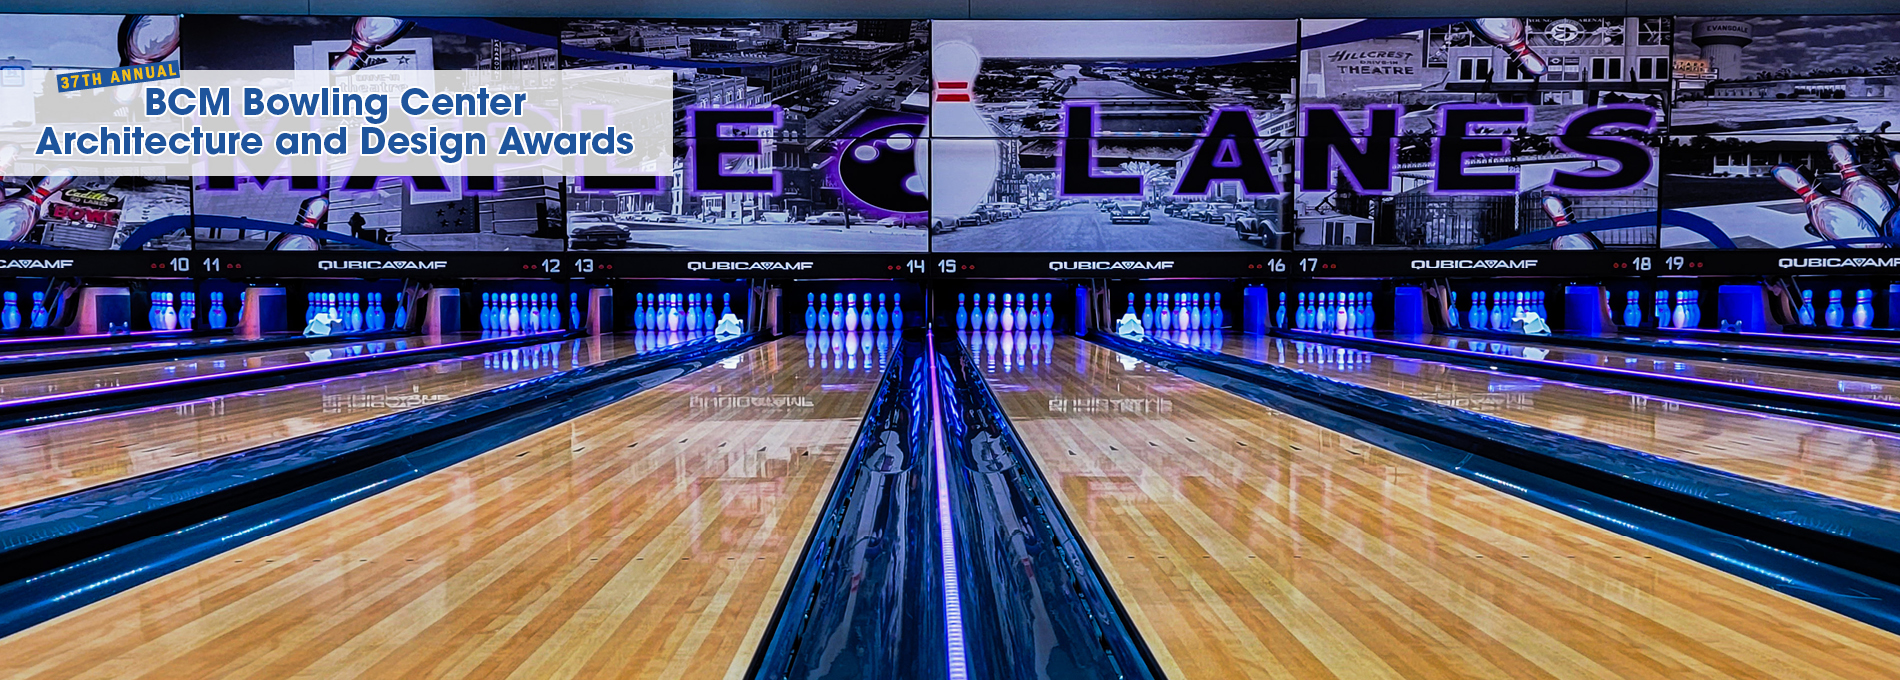 QubicaAMF 2021 bowling design awards banner Maple Lanes.jpg